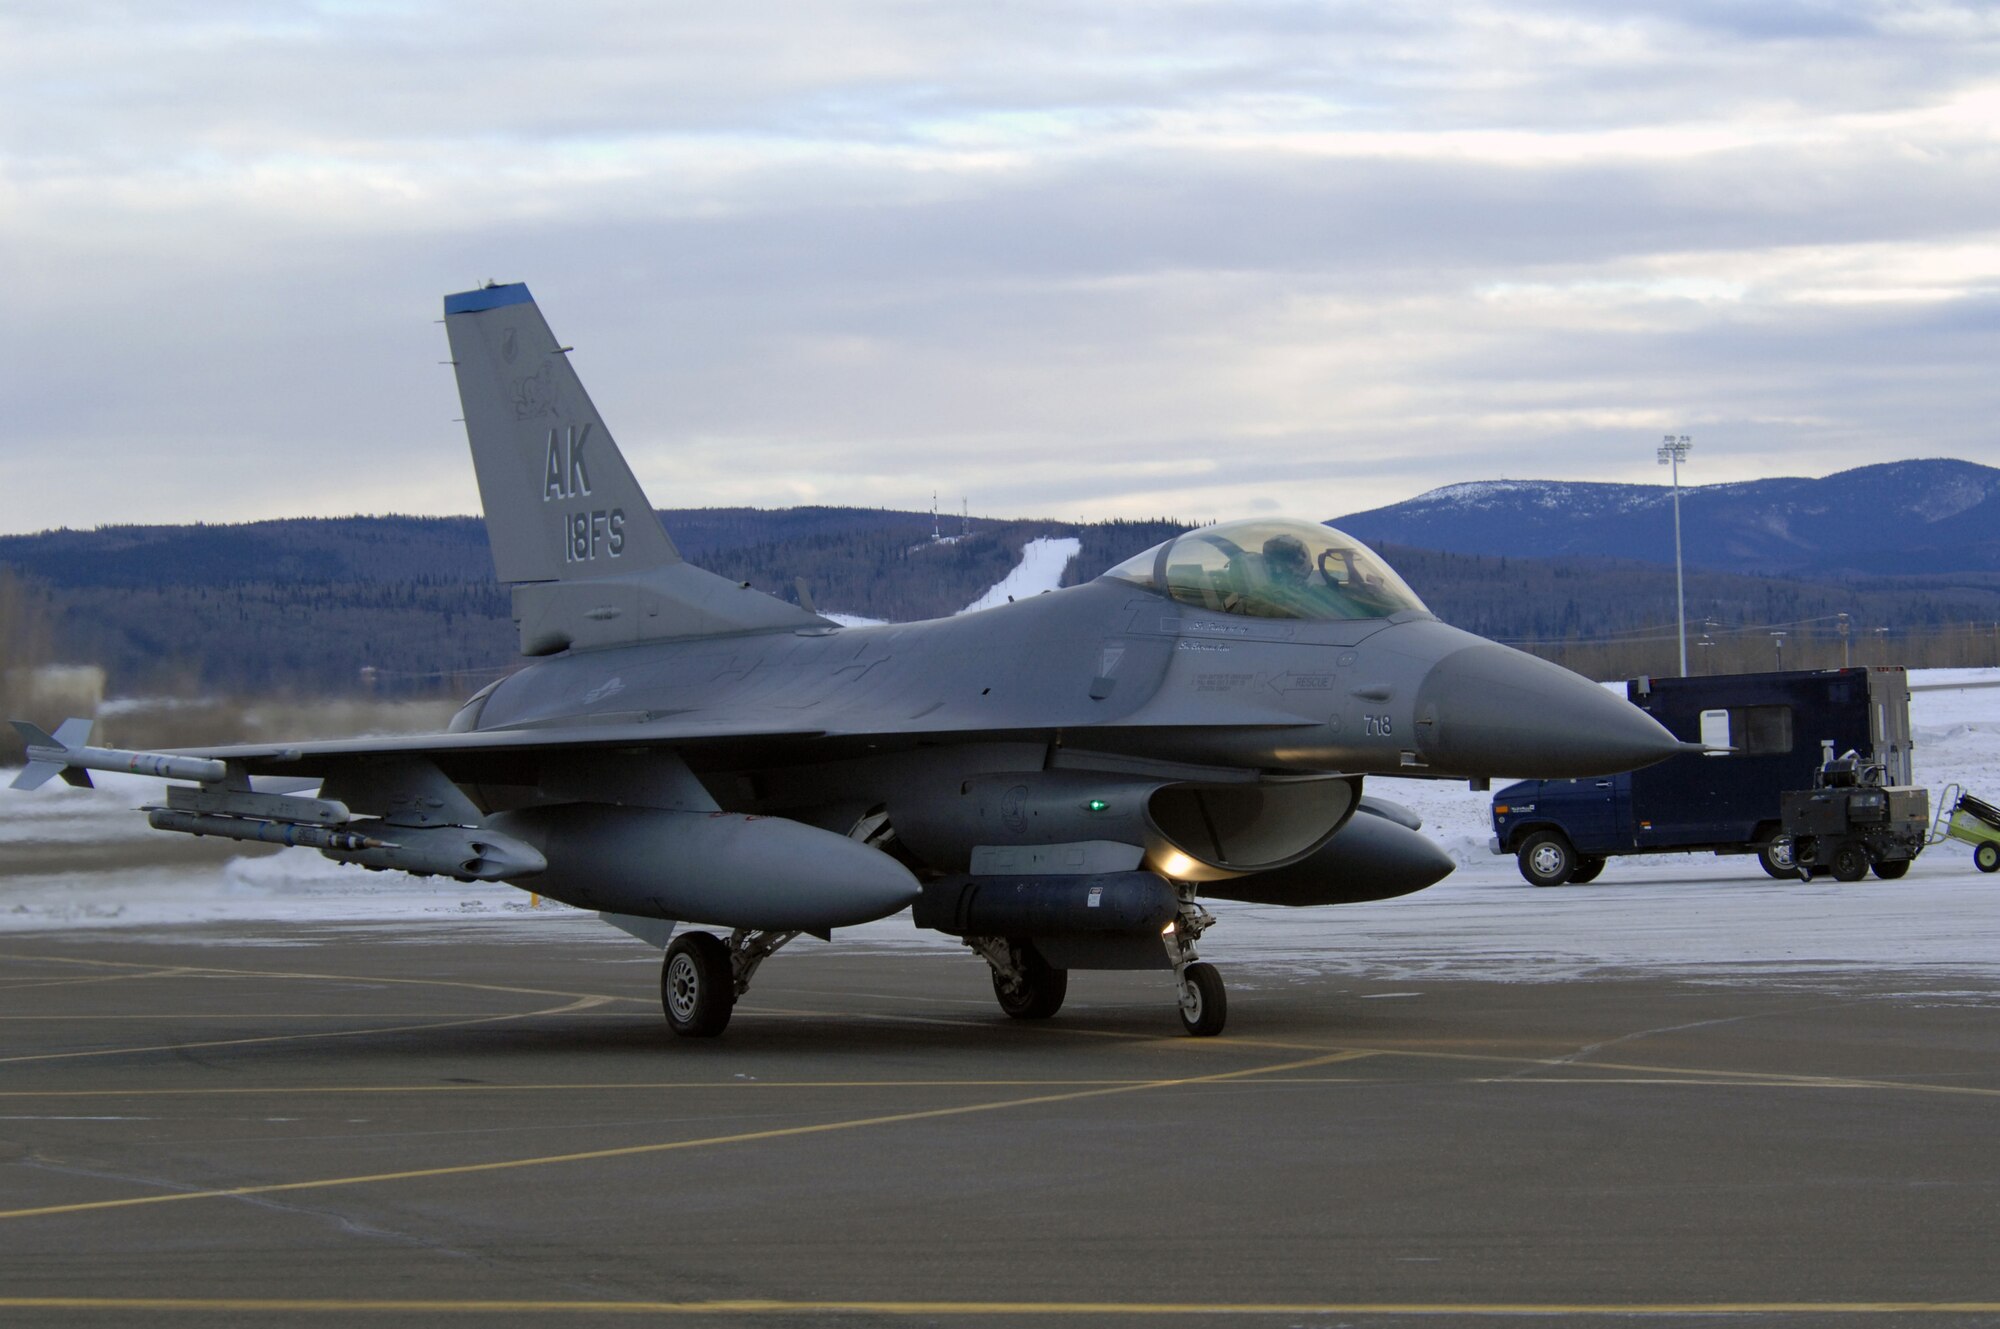 EIELSON AIR FORCE BASE, Alaska -- An F-16C Fighting Falcon aircraft from the 18th Fighter Squadron taxis on the flightline here prior to taking off for a training mission on Feb.8. The 18th Fighter Squadron conducts air operations for combat-ready F-16 aircraft and provides close air support, forward air control (airborne), battlefield air interdiction, and offensive counter air.
(U.S. Air Force Photo by Staff Sgt Joshua Strang)